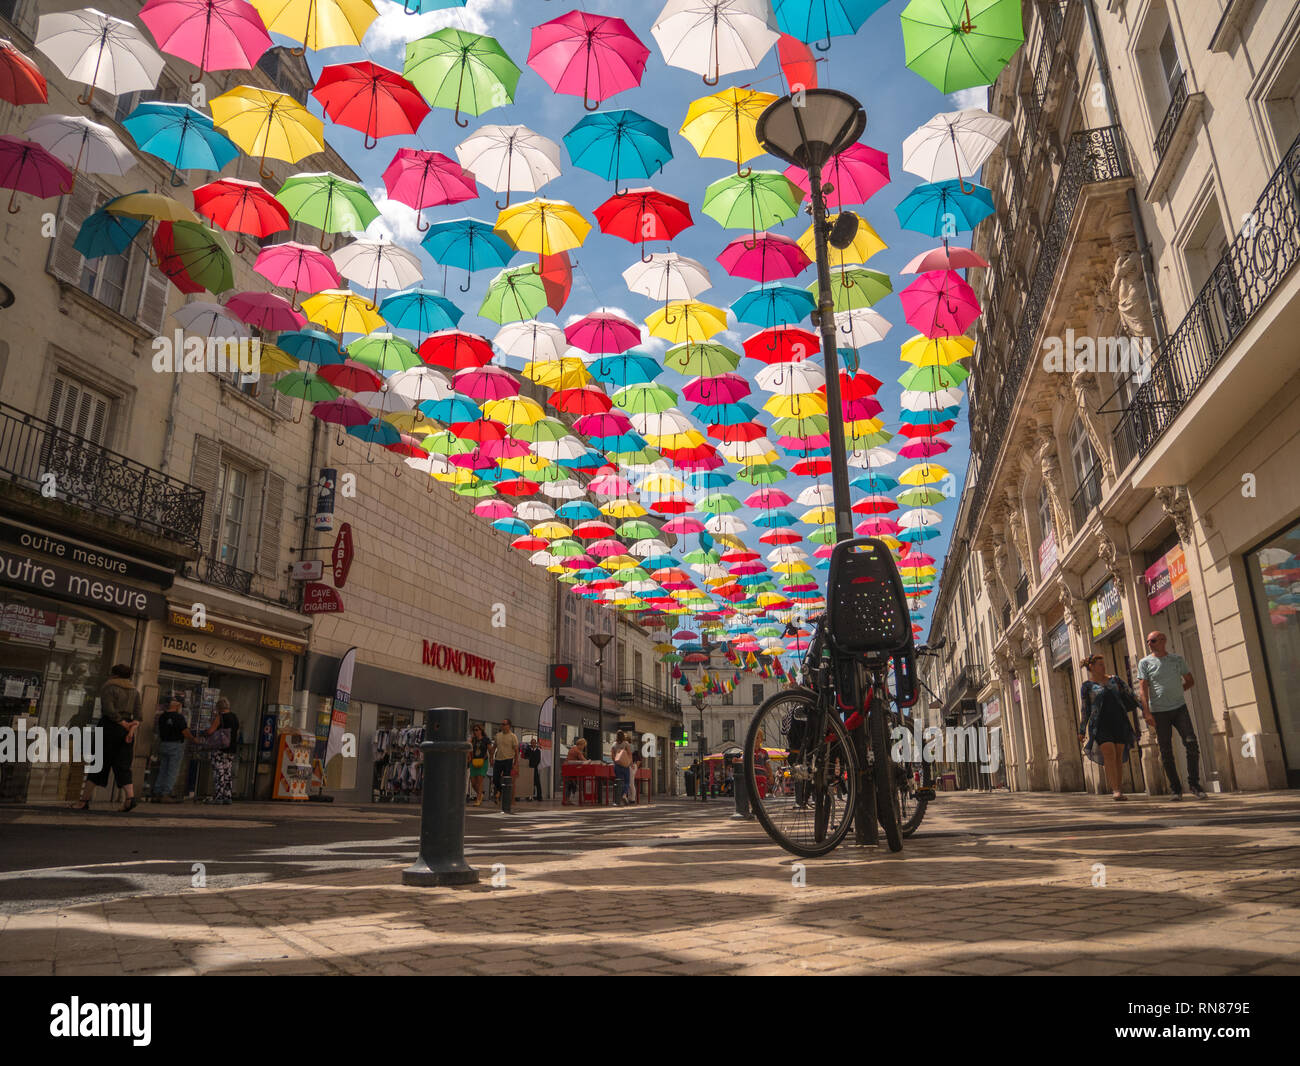 Mult-coloured rainbow umbrellas hanging over a street, with lamposts and bikes, in Saumur, Loire Valley, France Stock Photo